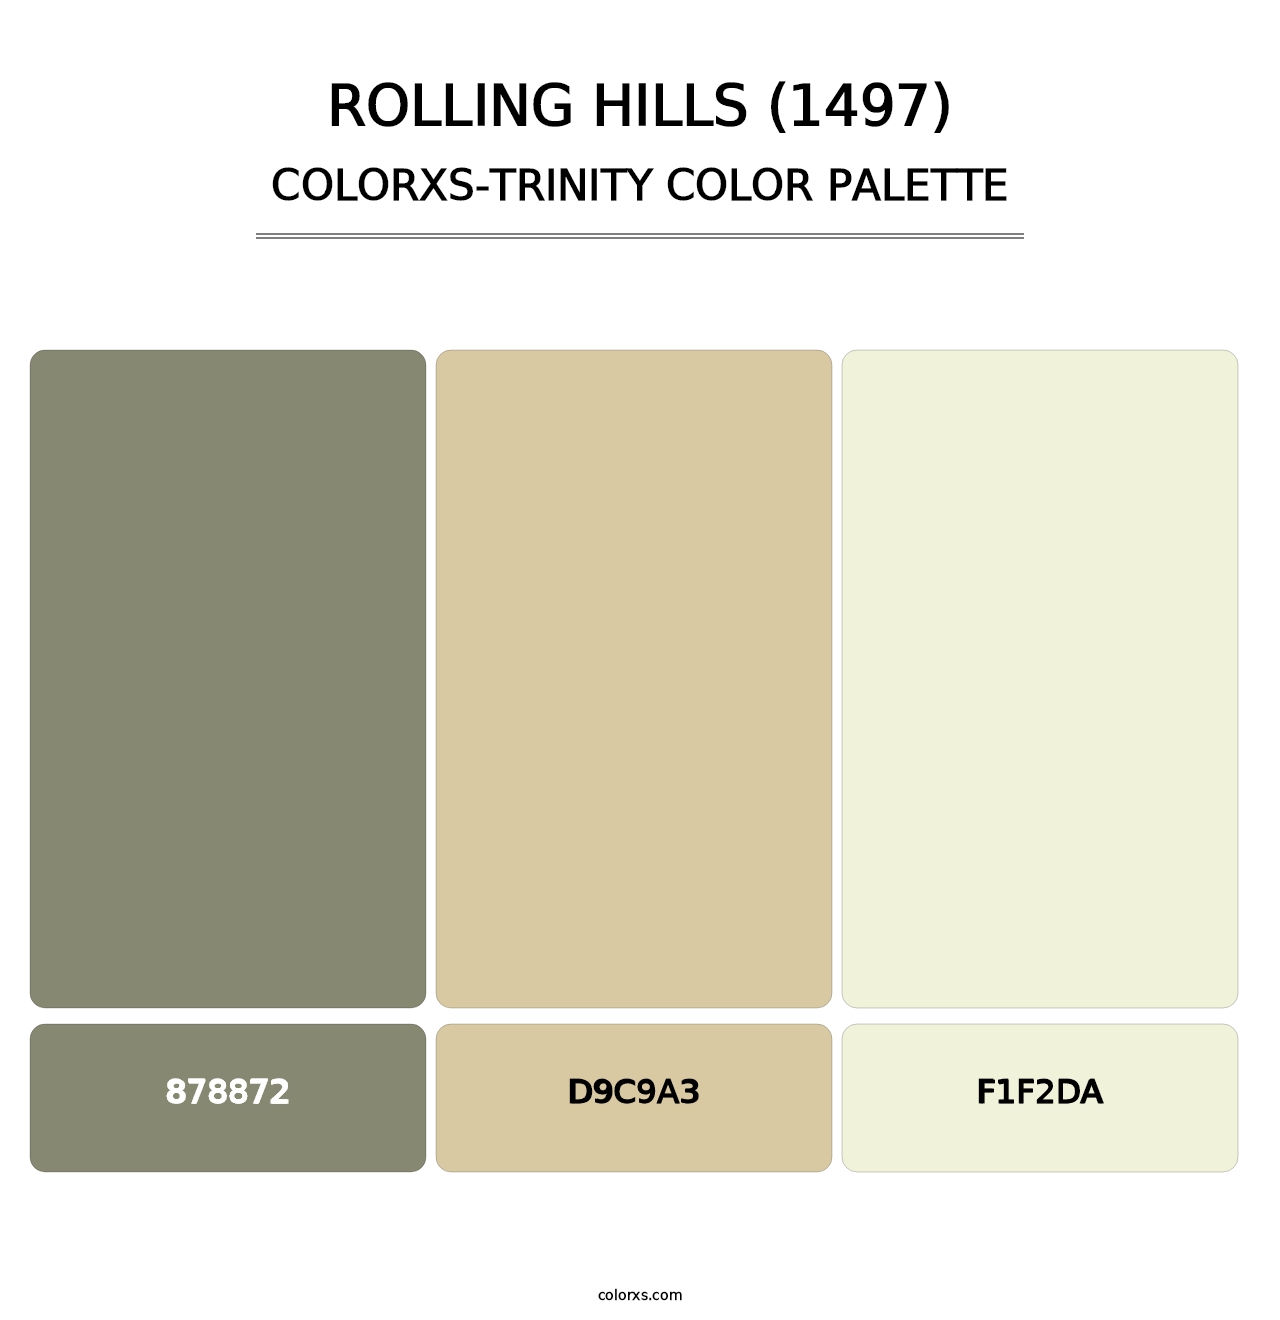 Rolling Hills (1497) - Colorxs Trinity Palette